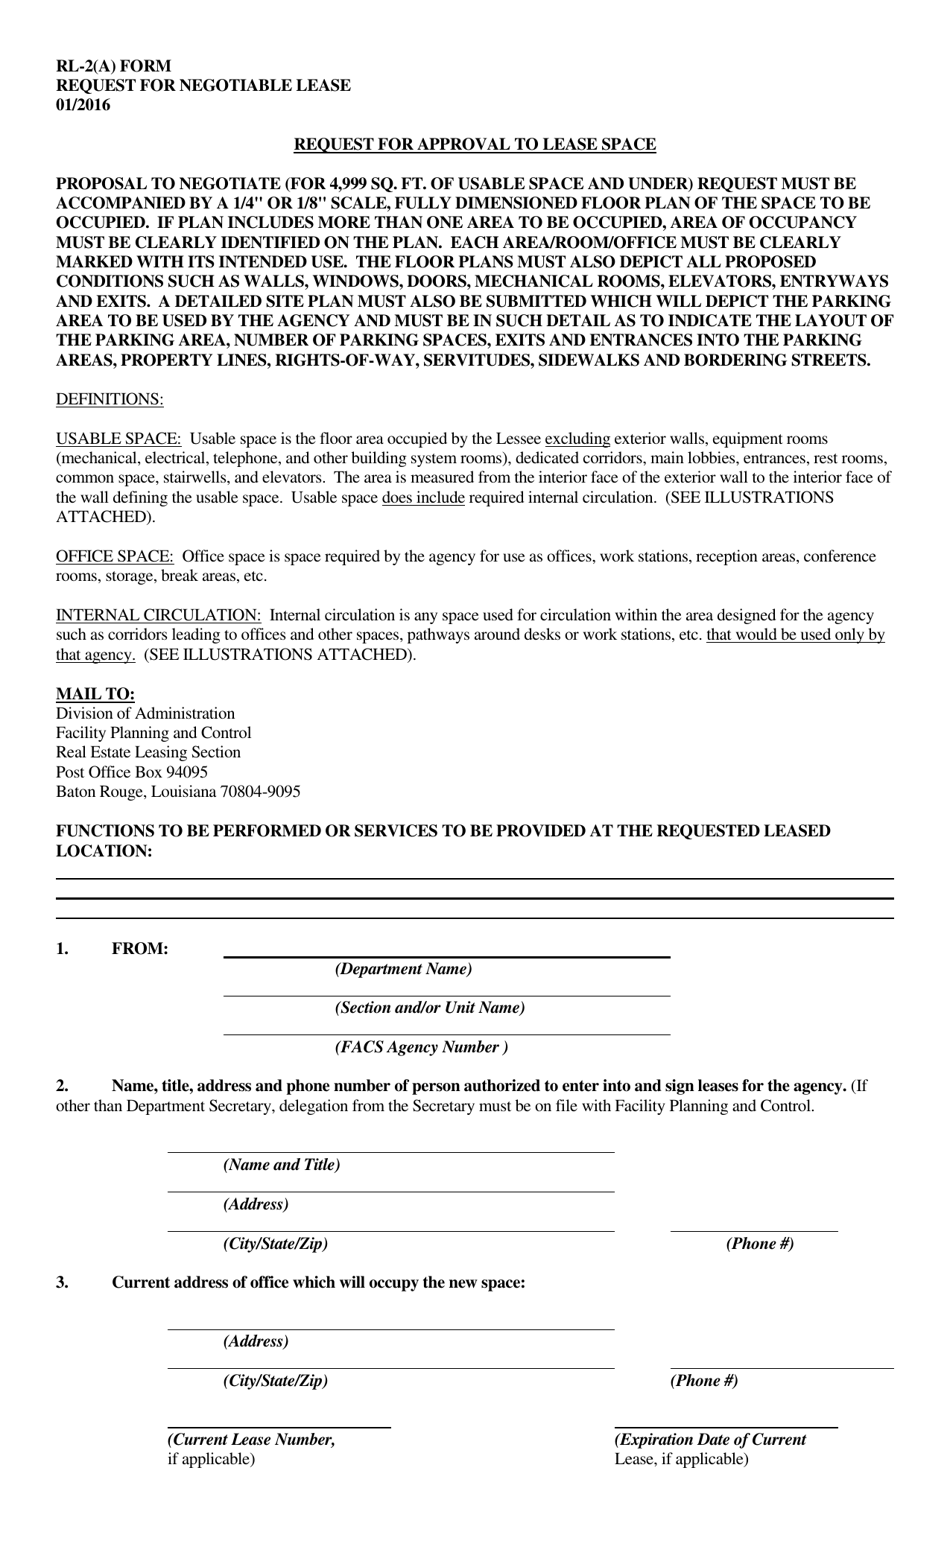 Form RL-2(A) Request for Negotiable Lease - Louisiana, Page 1